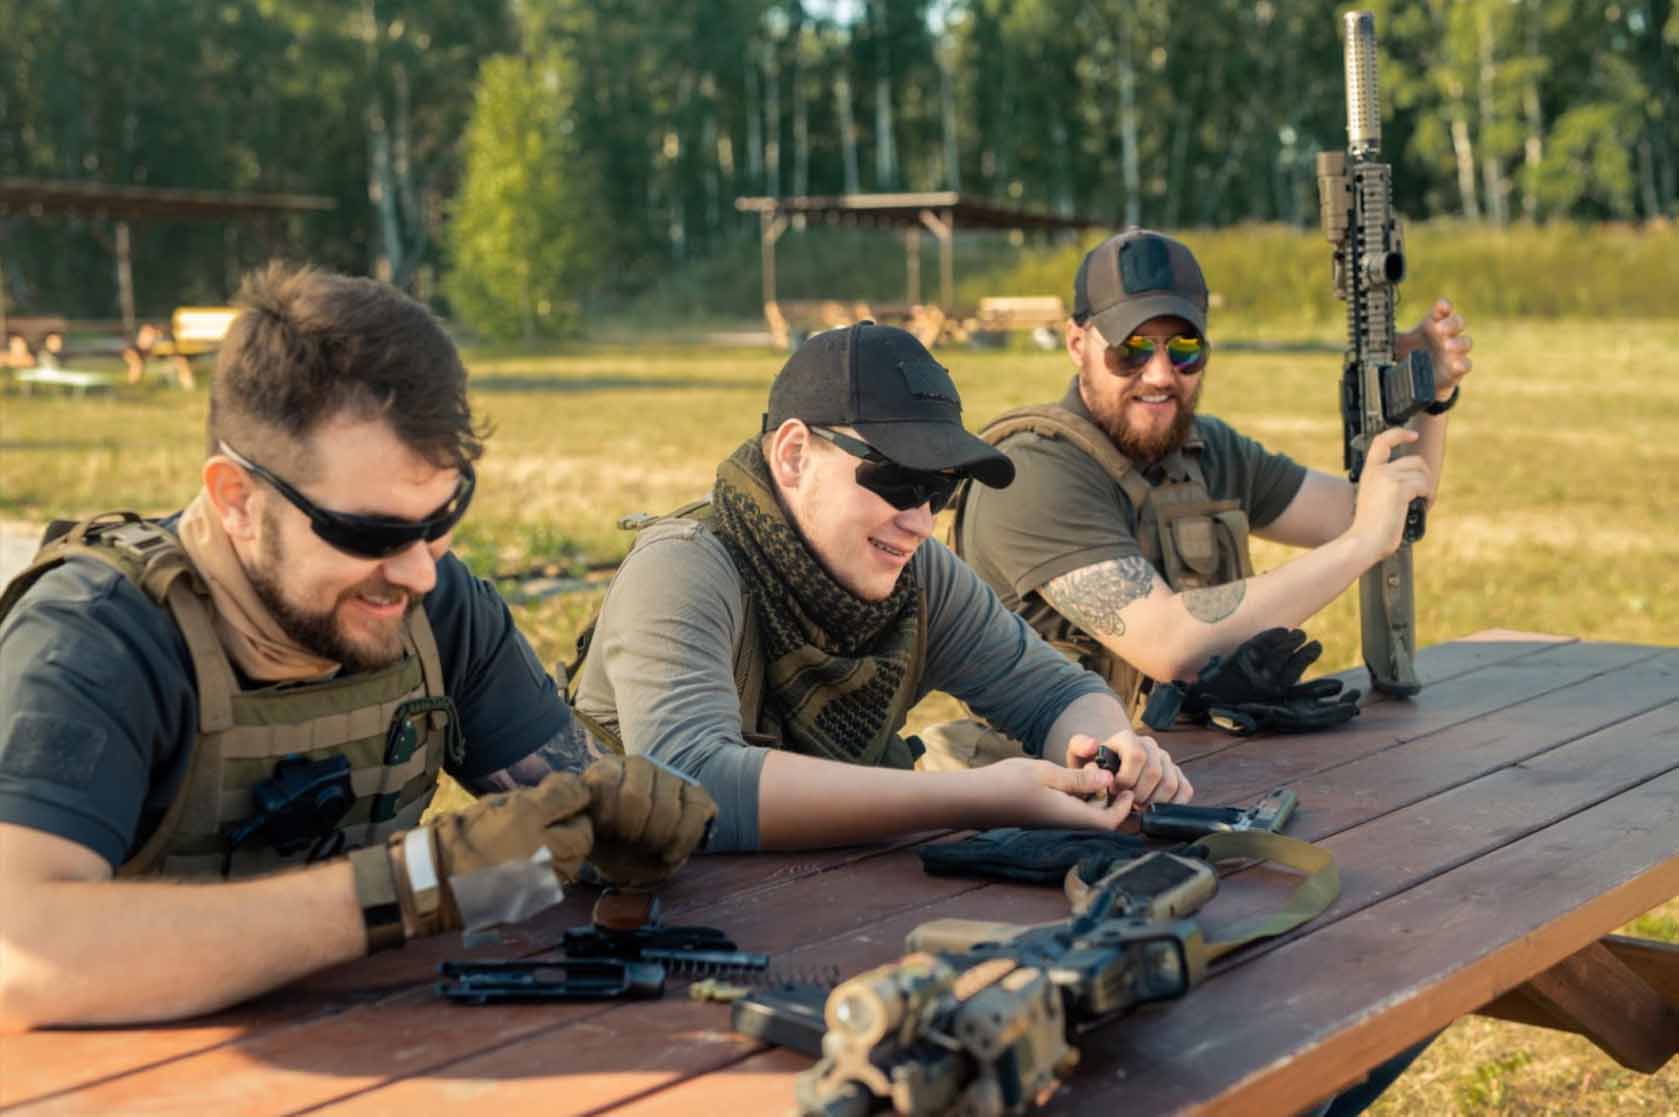 Three men, each attentively reloading their firearms, demonstrating readiness and precision.